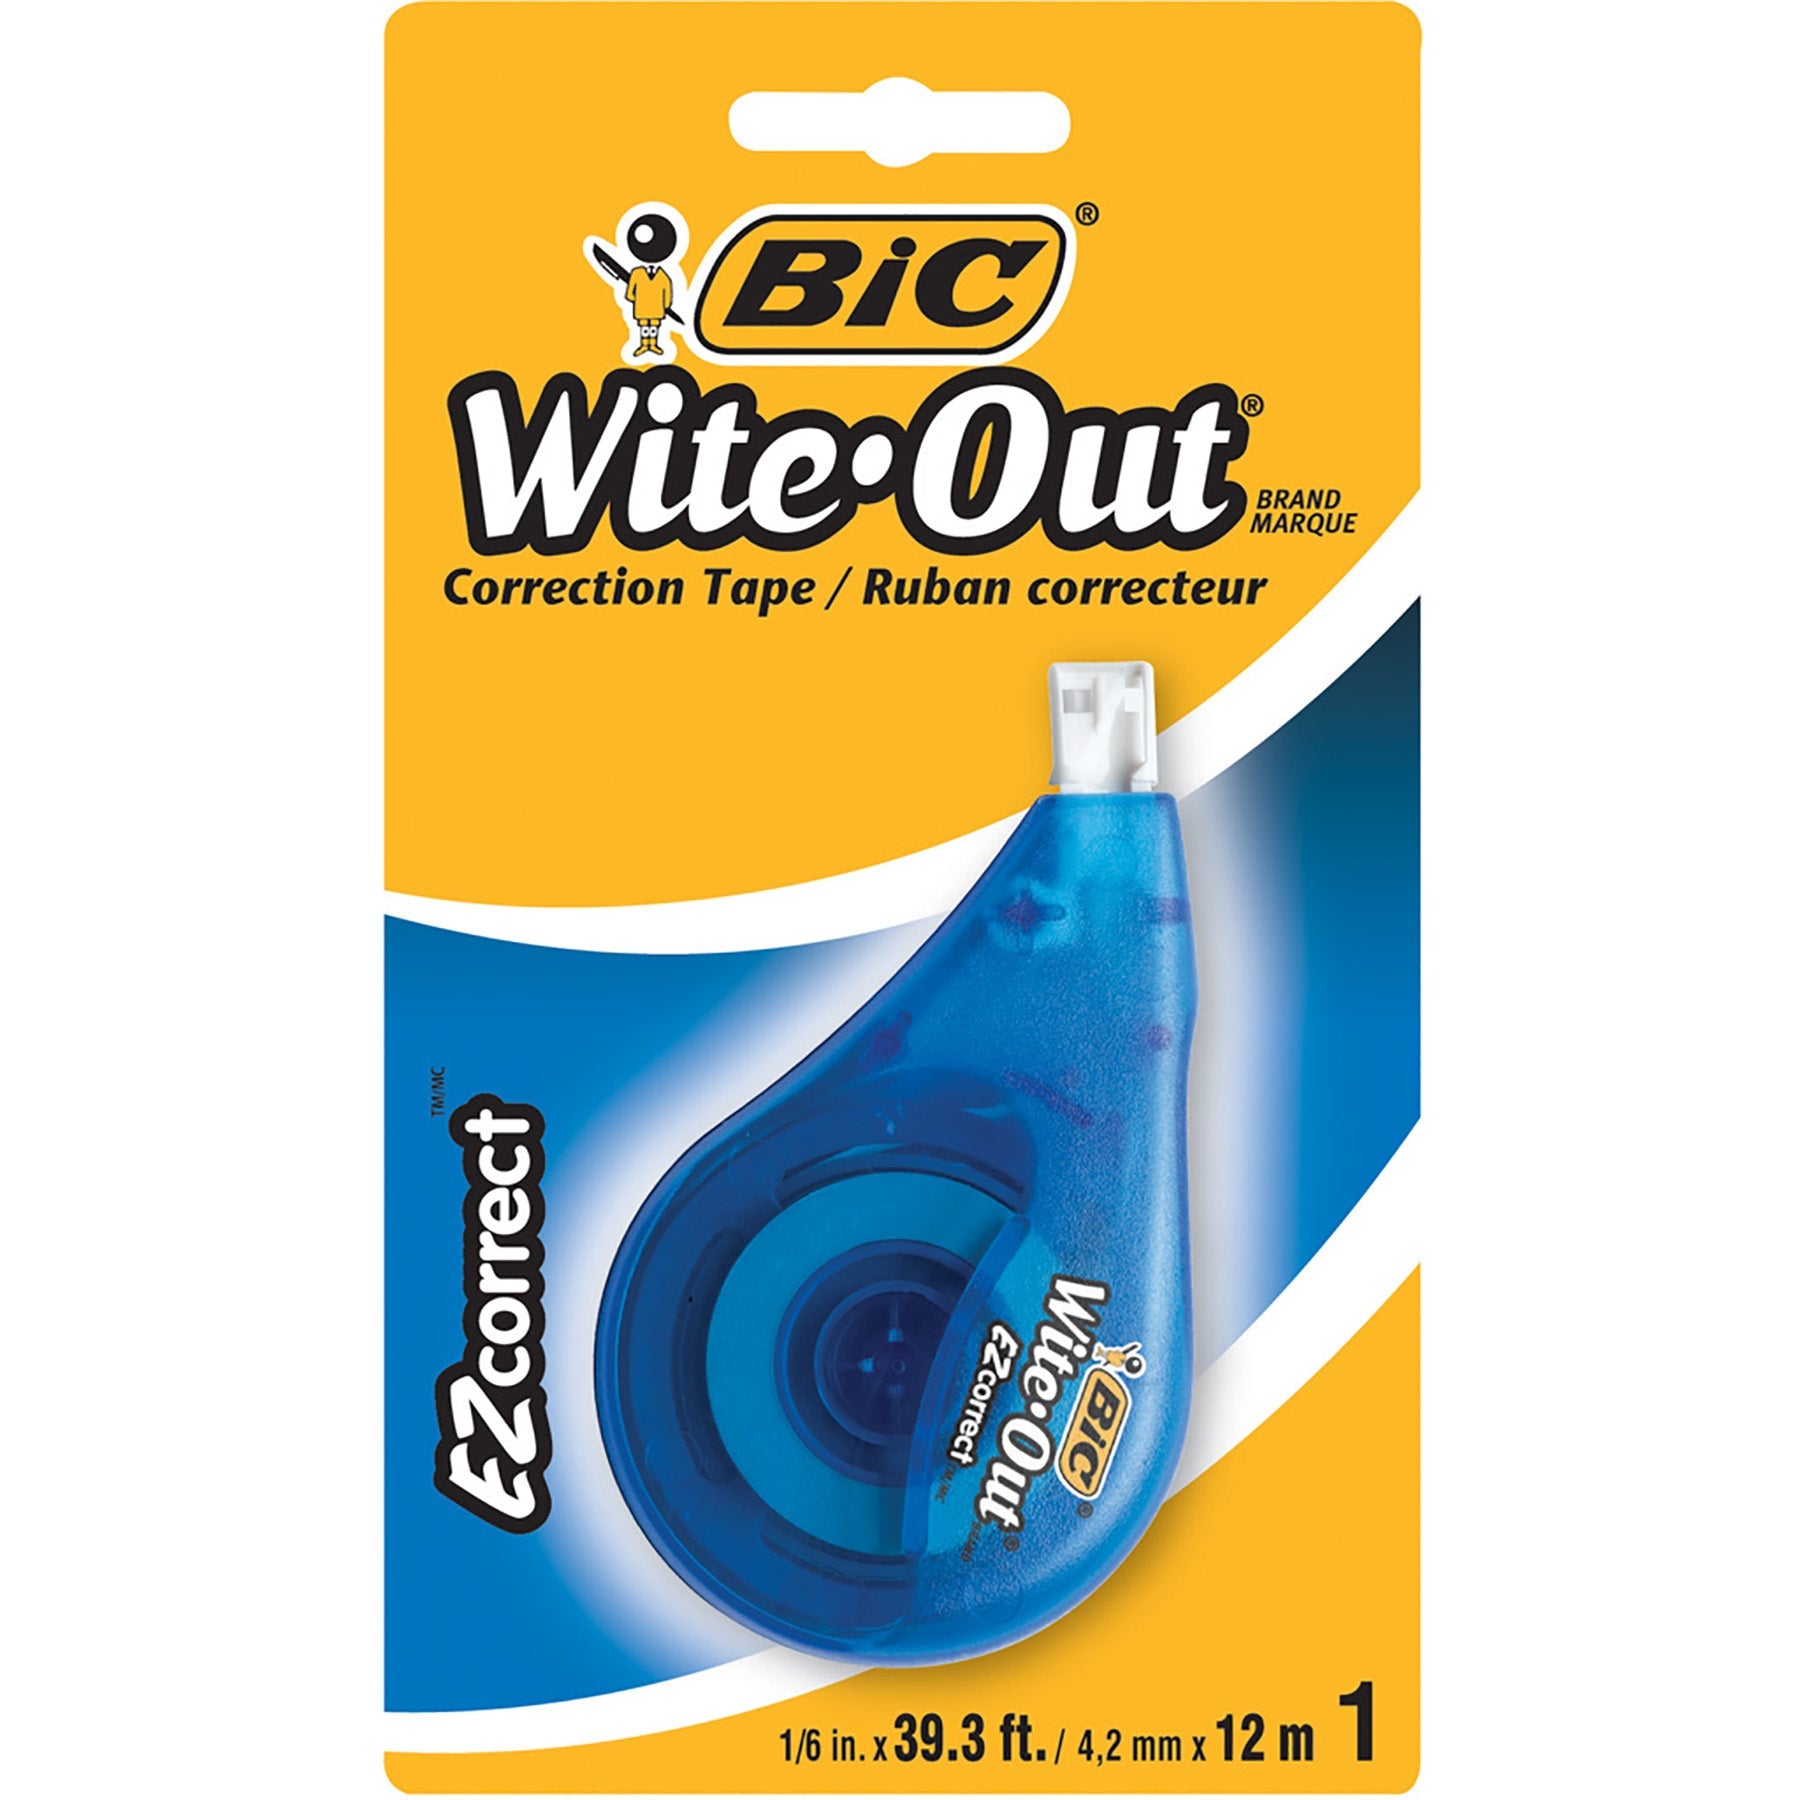 Bic Wite-out Correction Tape 0.1in x 39.3ft